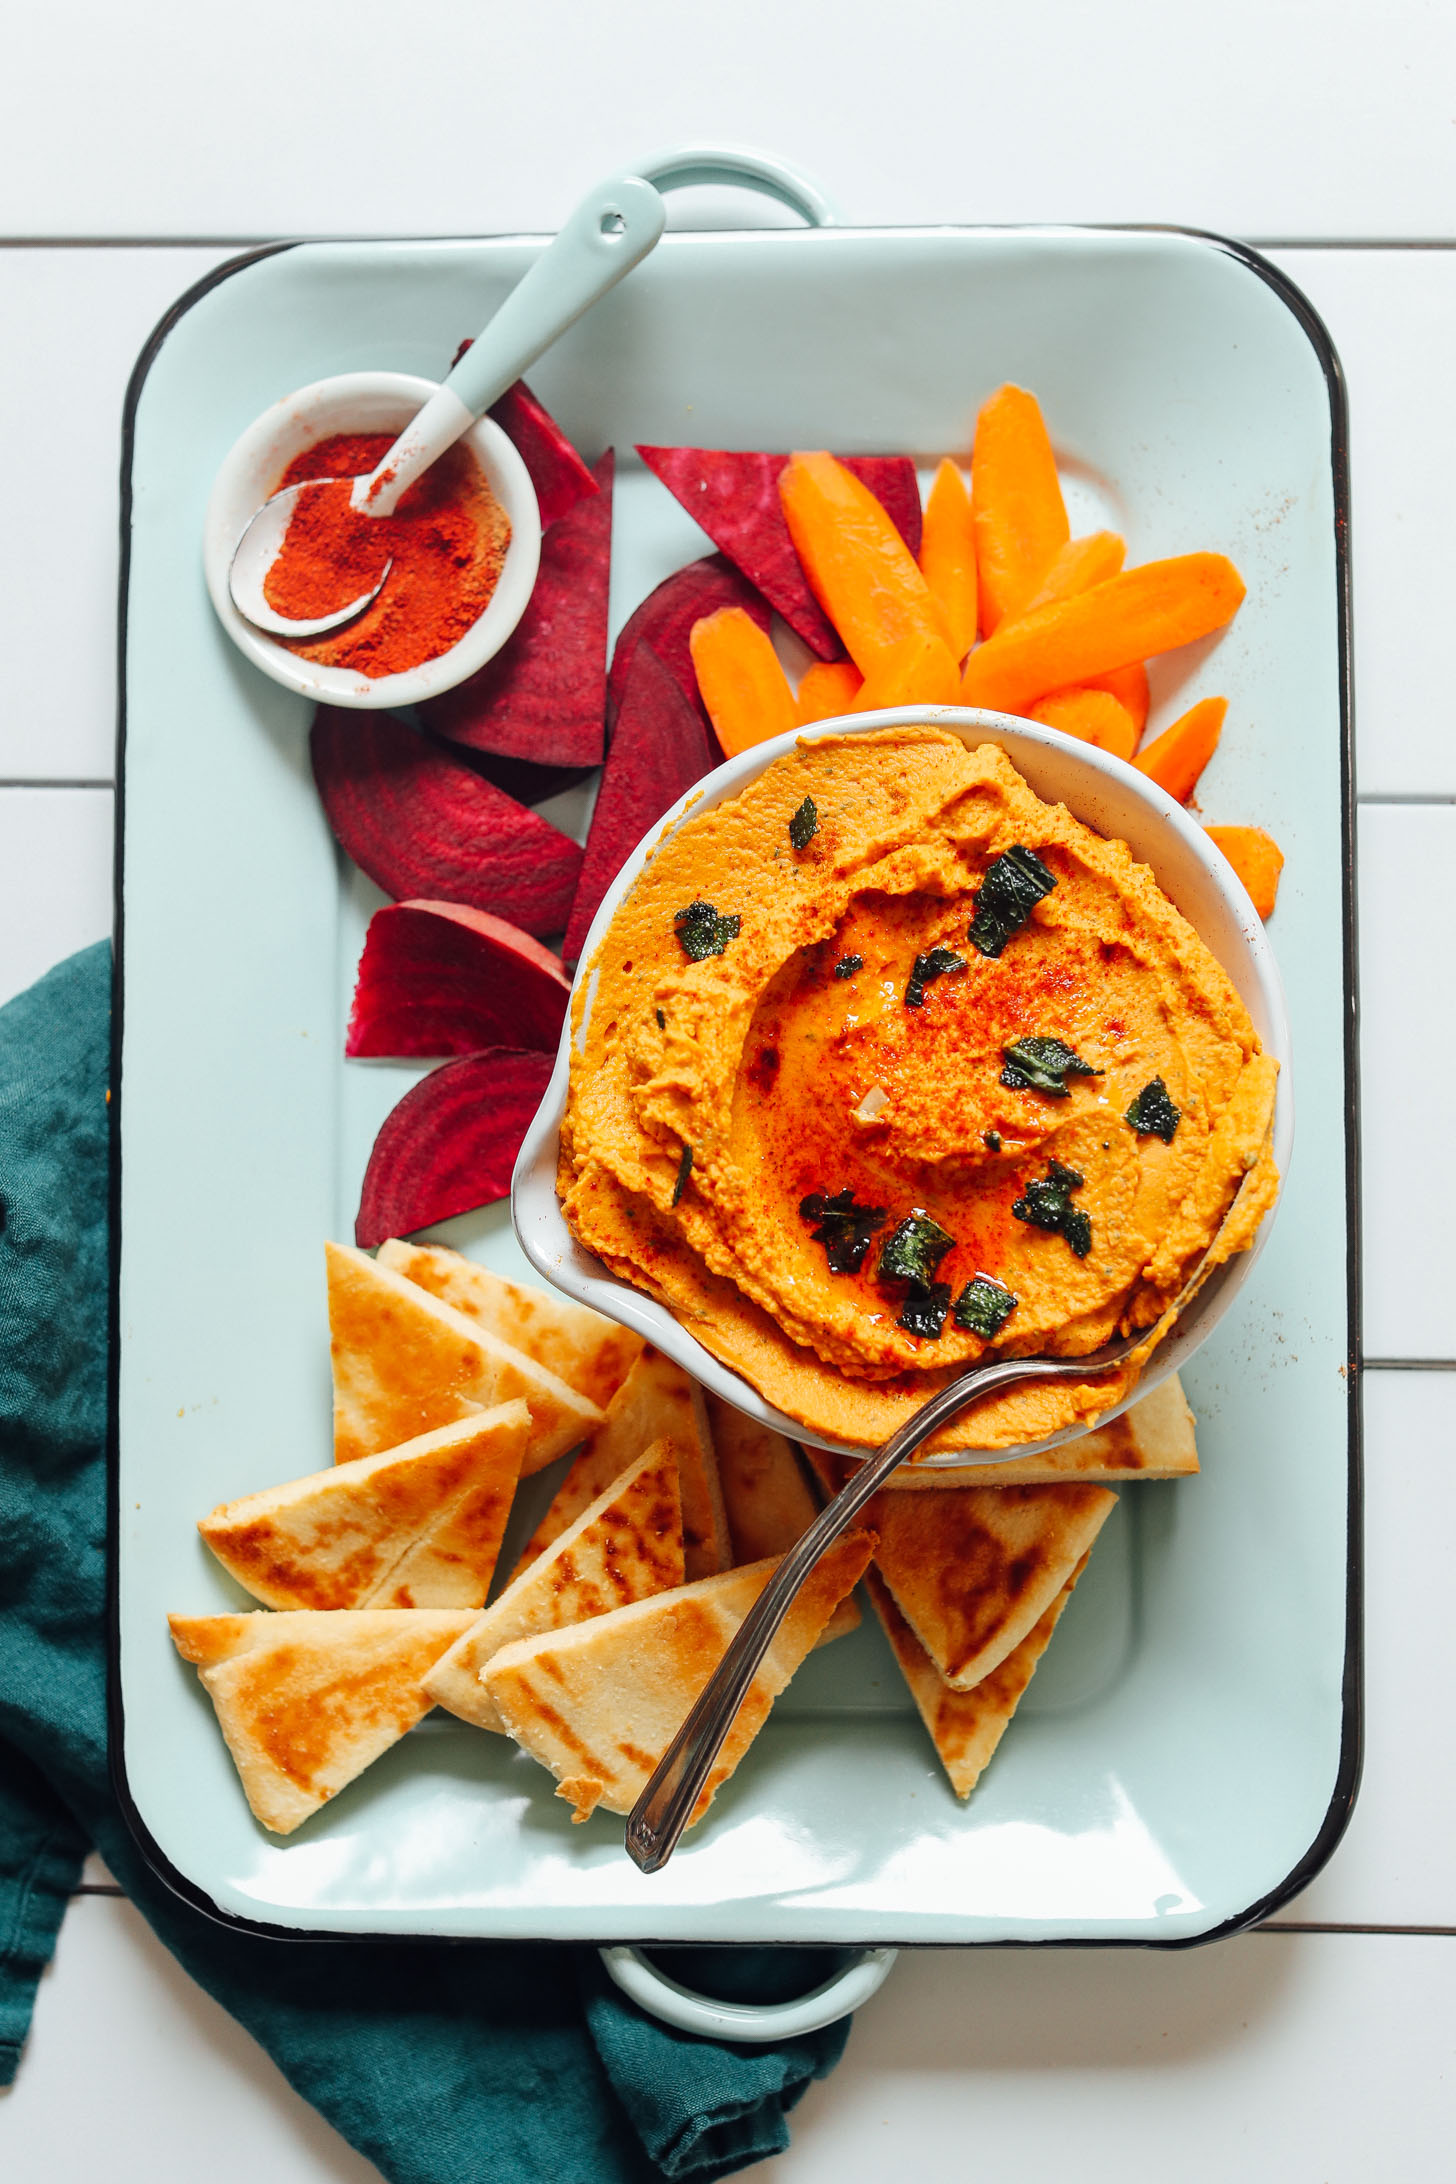 Tray with a bowl of our White Bean Pumpkin Hummus recipe with beet, carrot, and pita for dipping